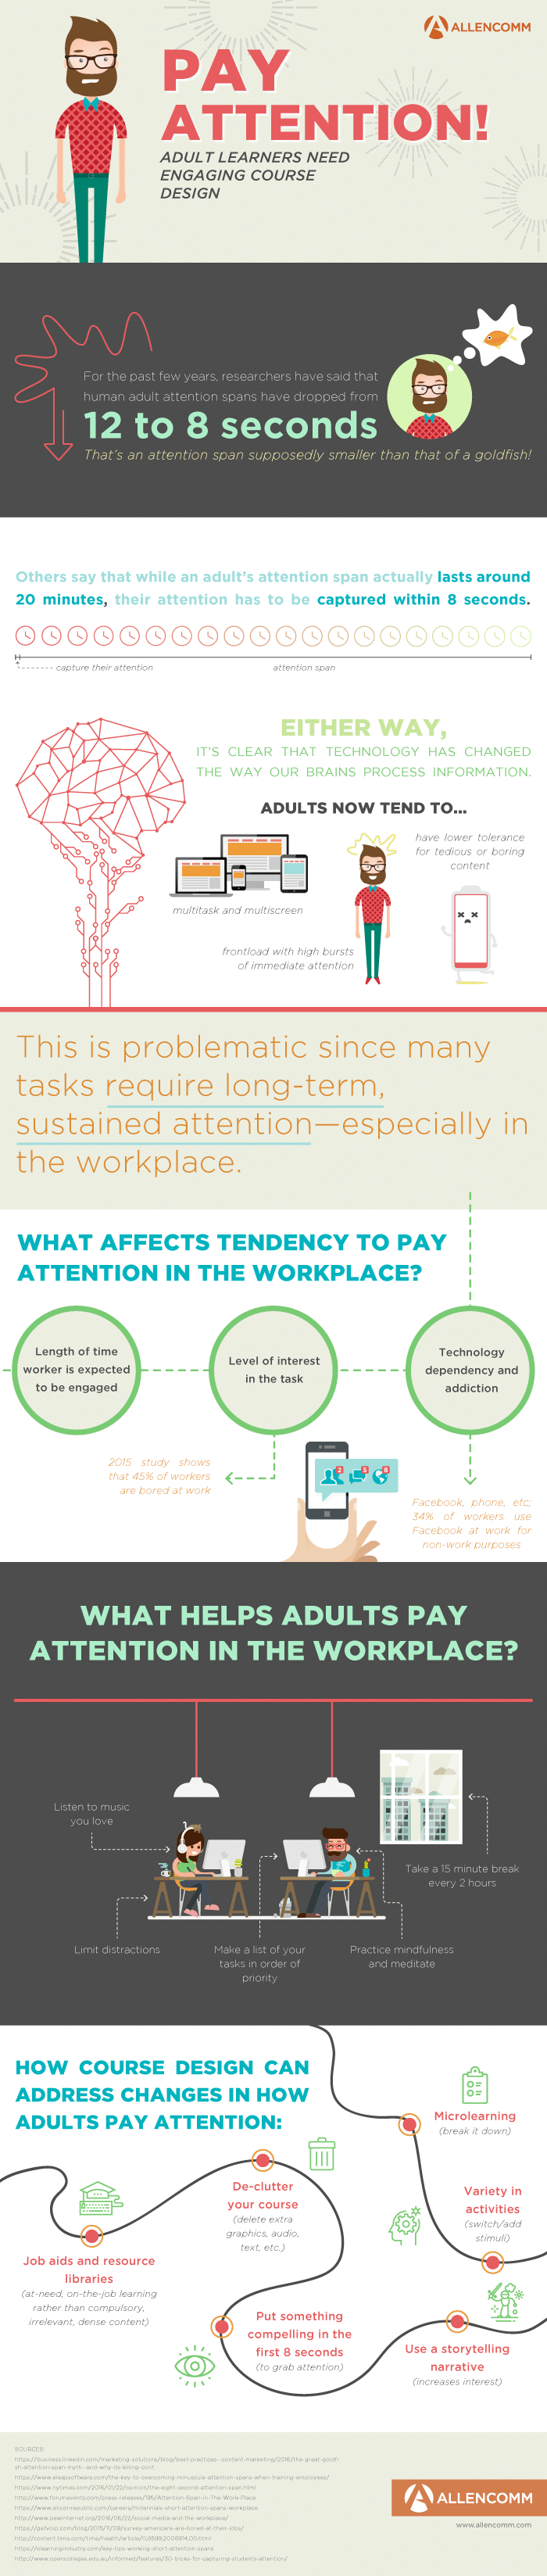 Infographic - Pay Attention-Adult Learners Need Engaging Course Design -- Allen Communication